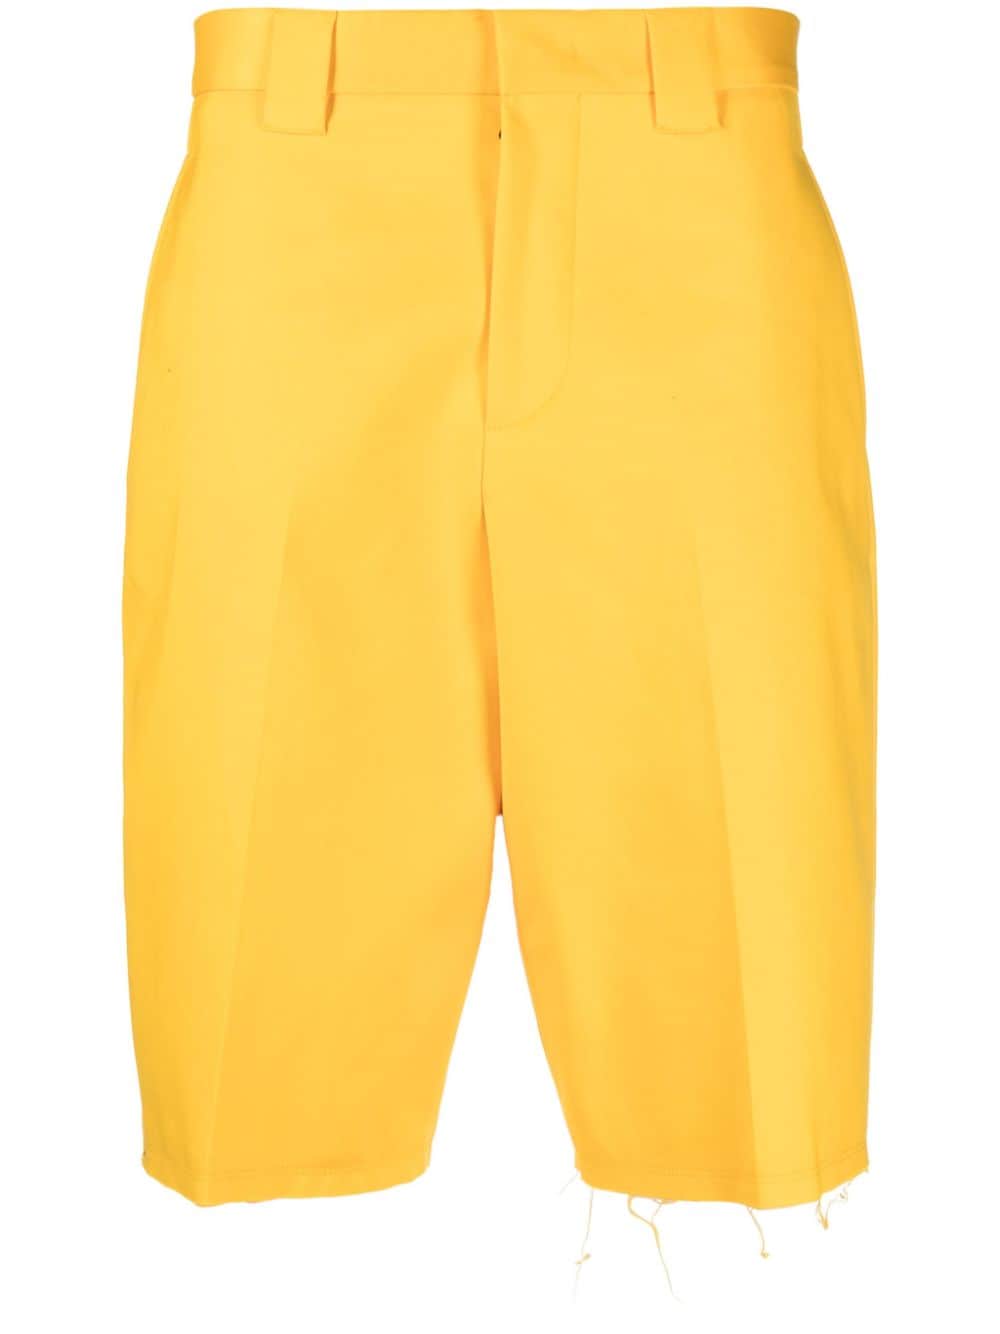 Lanvin Distressed Cotton Shorts In Yellow